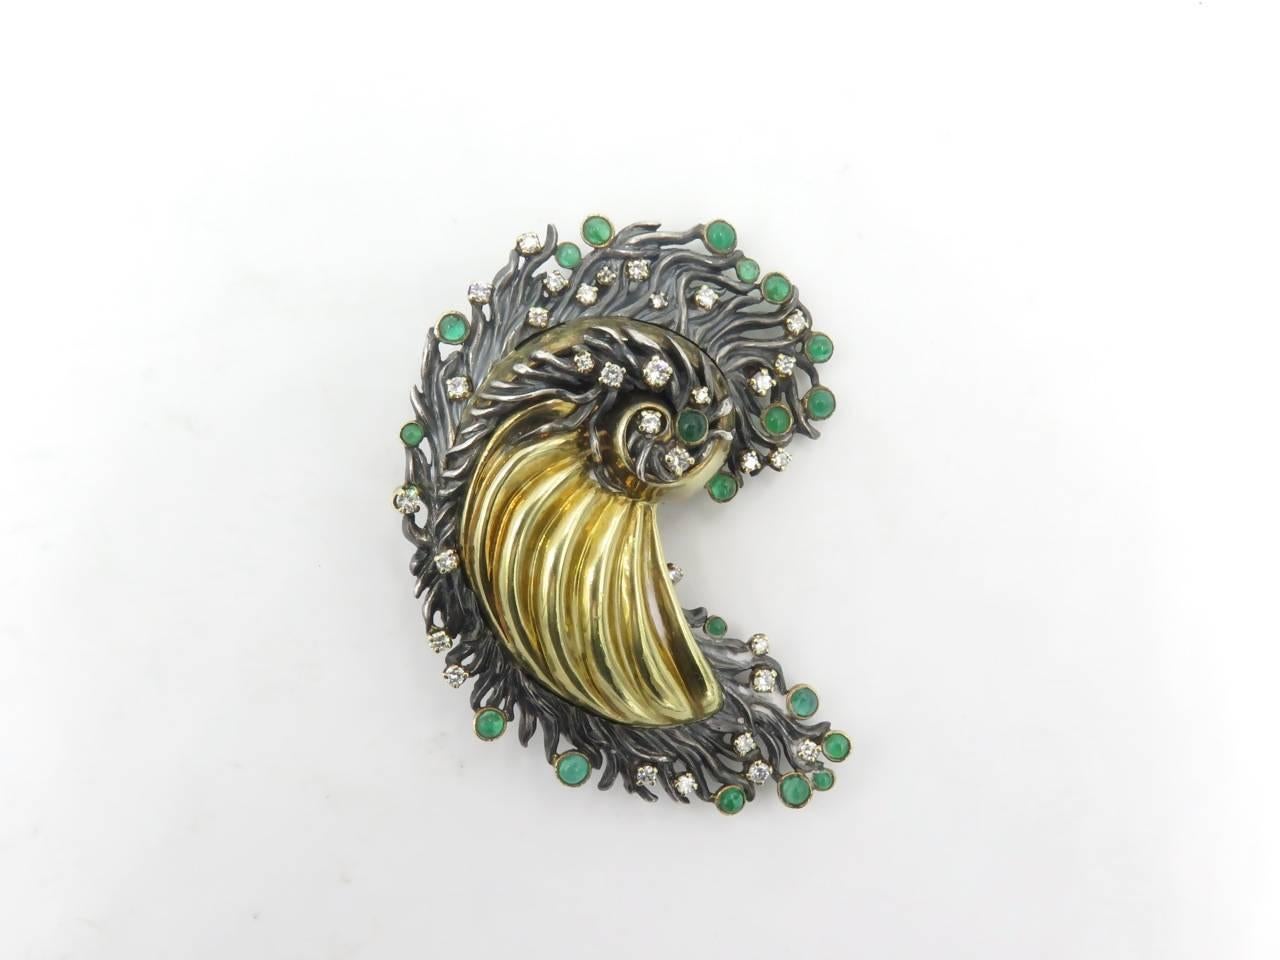 An 18 karat yellow gold, sterling silver, emerald and diamond brooch. Attributed to Marilyn Cooperman. Of paisley design. Centering a polished fluted gold panel, extending scrolling silver fringe, set with circular cut diamonds and round cabochon